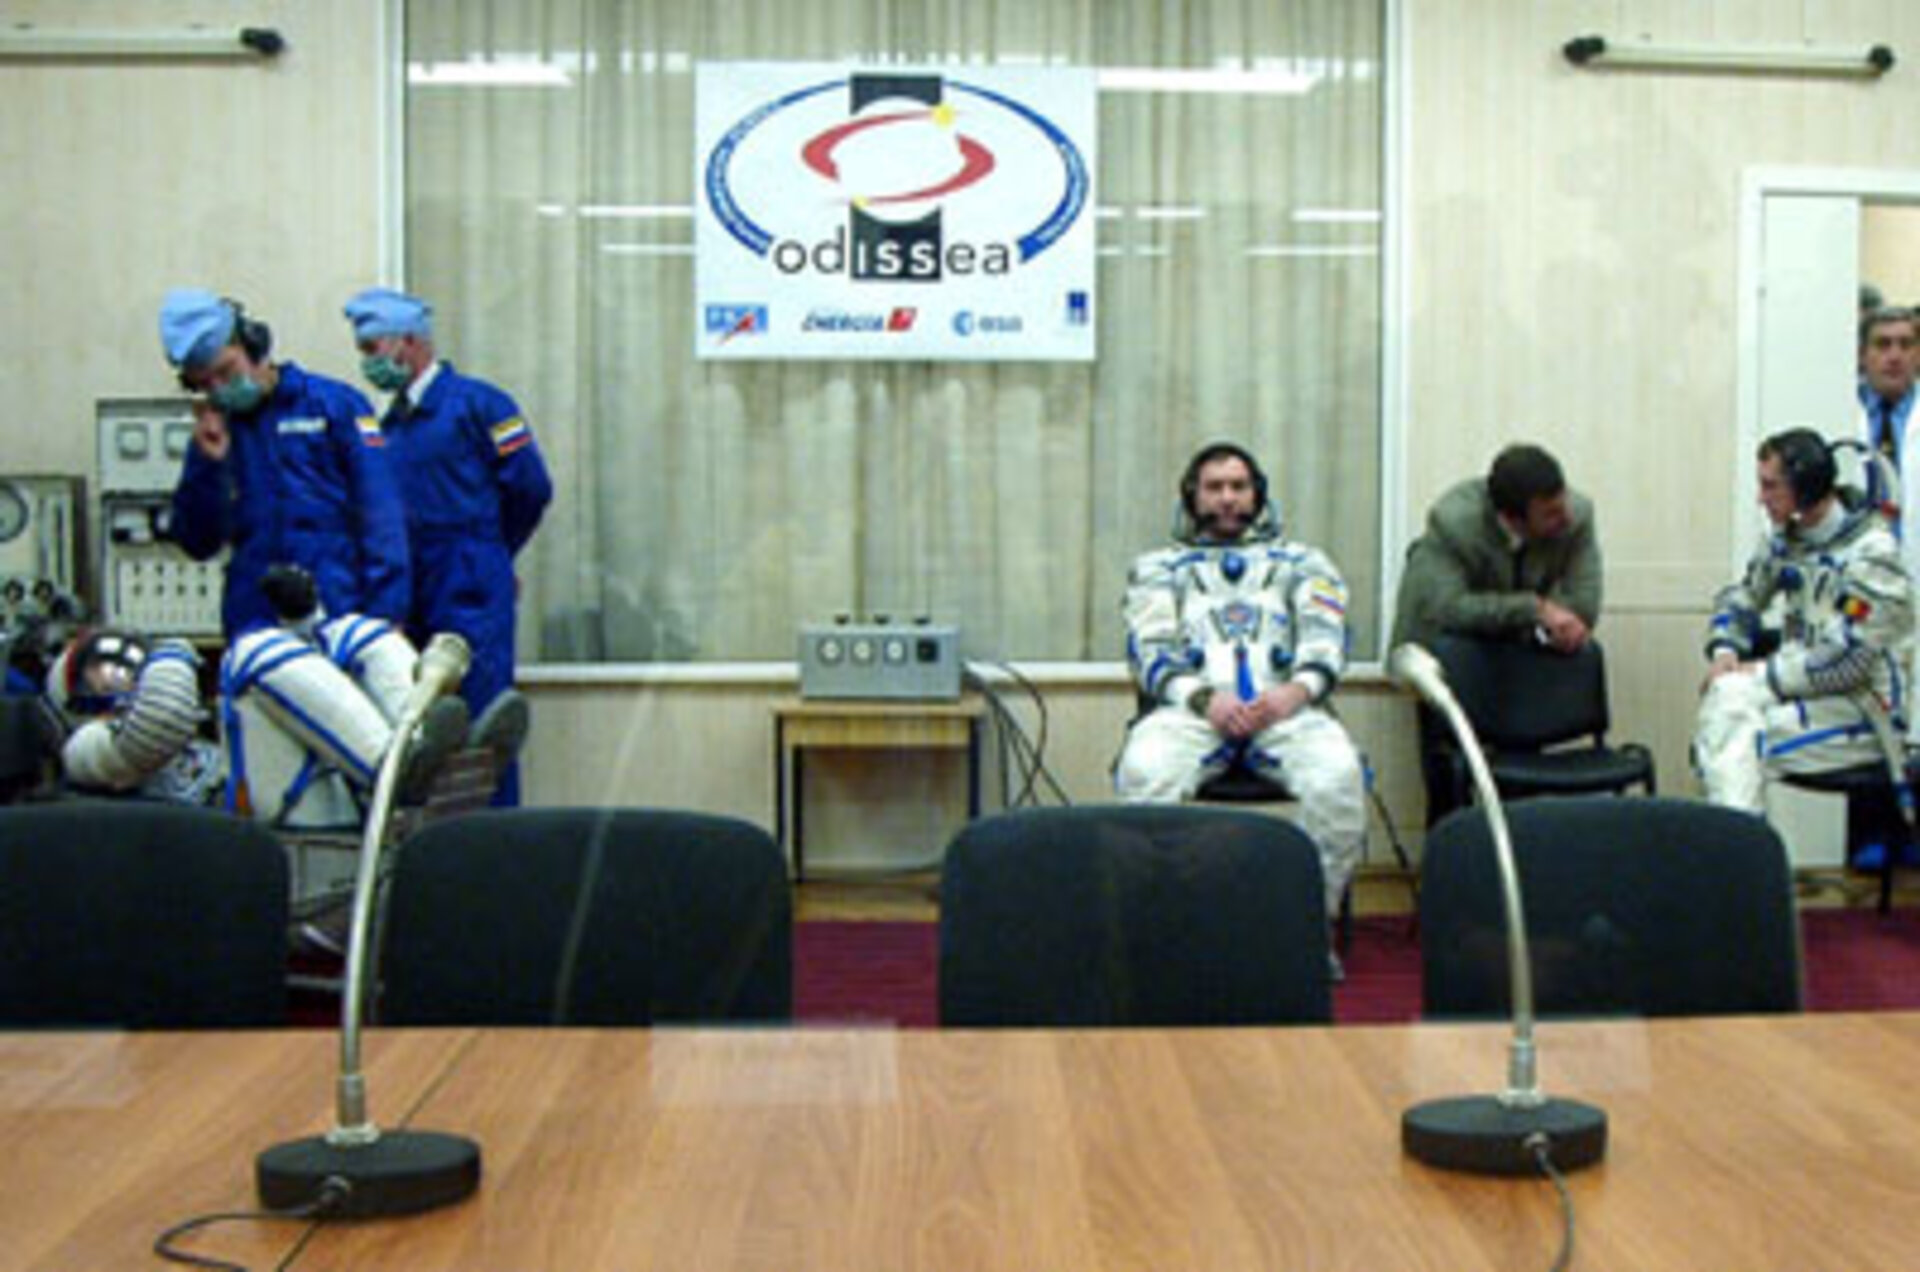 October 30 - Launch day! Crew donning suits